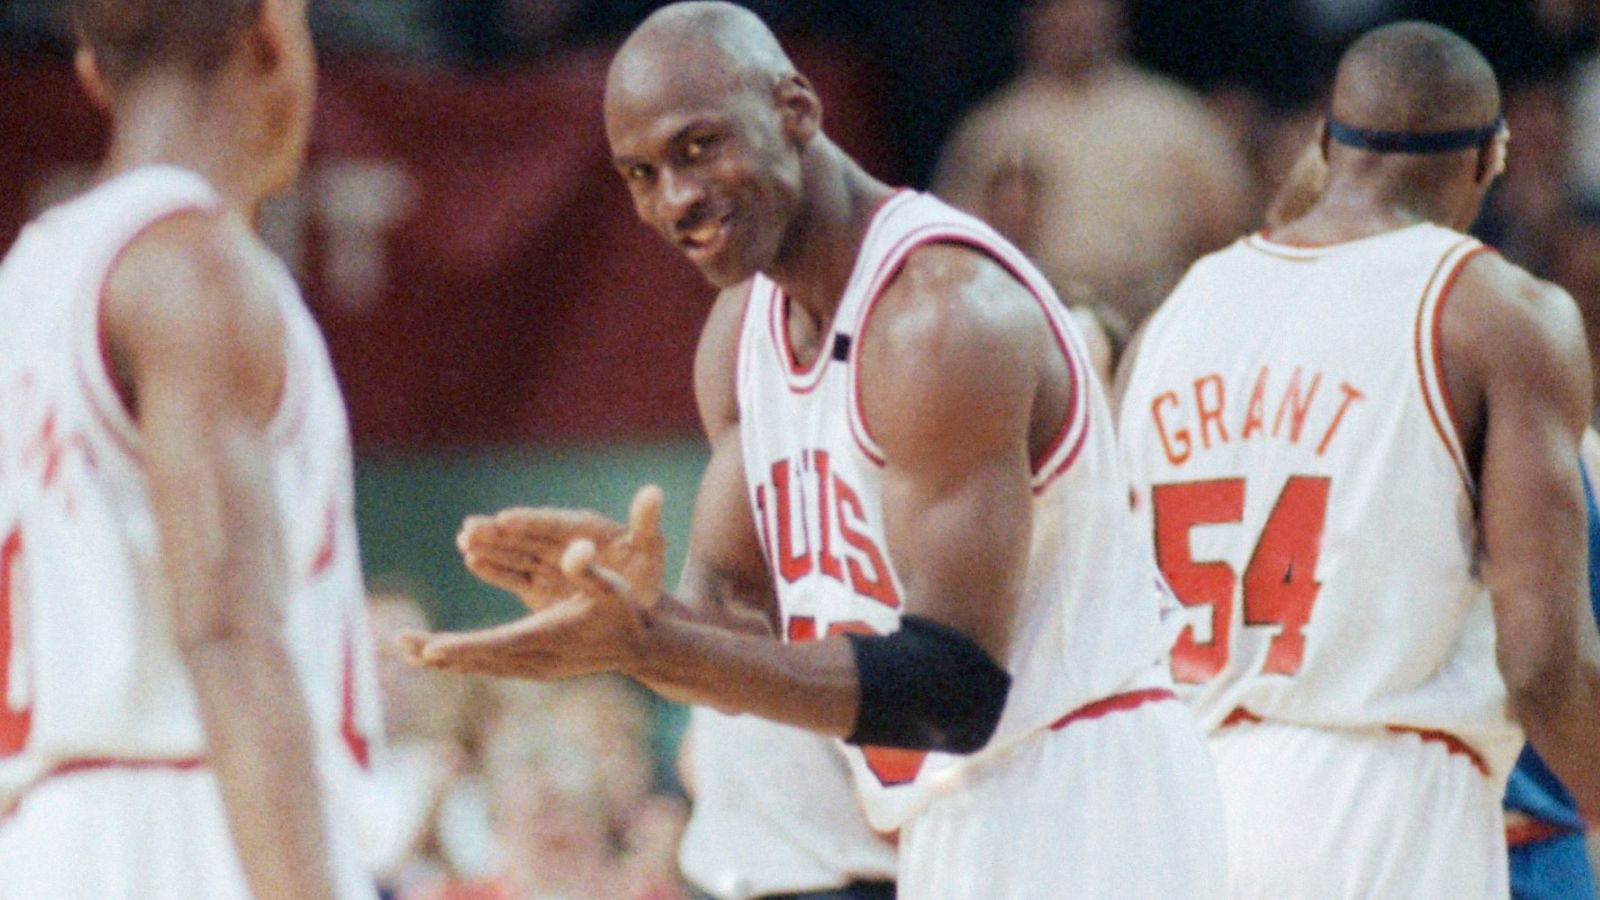 Michael Jordan says he would have returned to play for Chicago